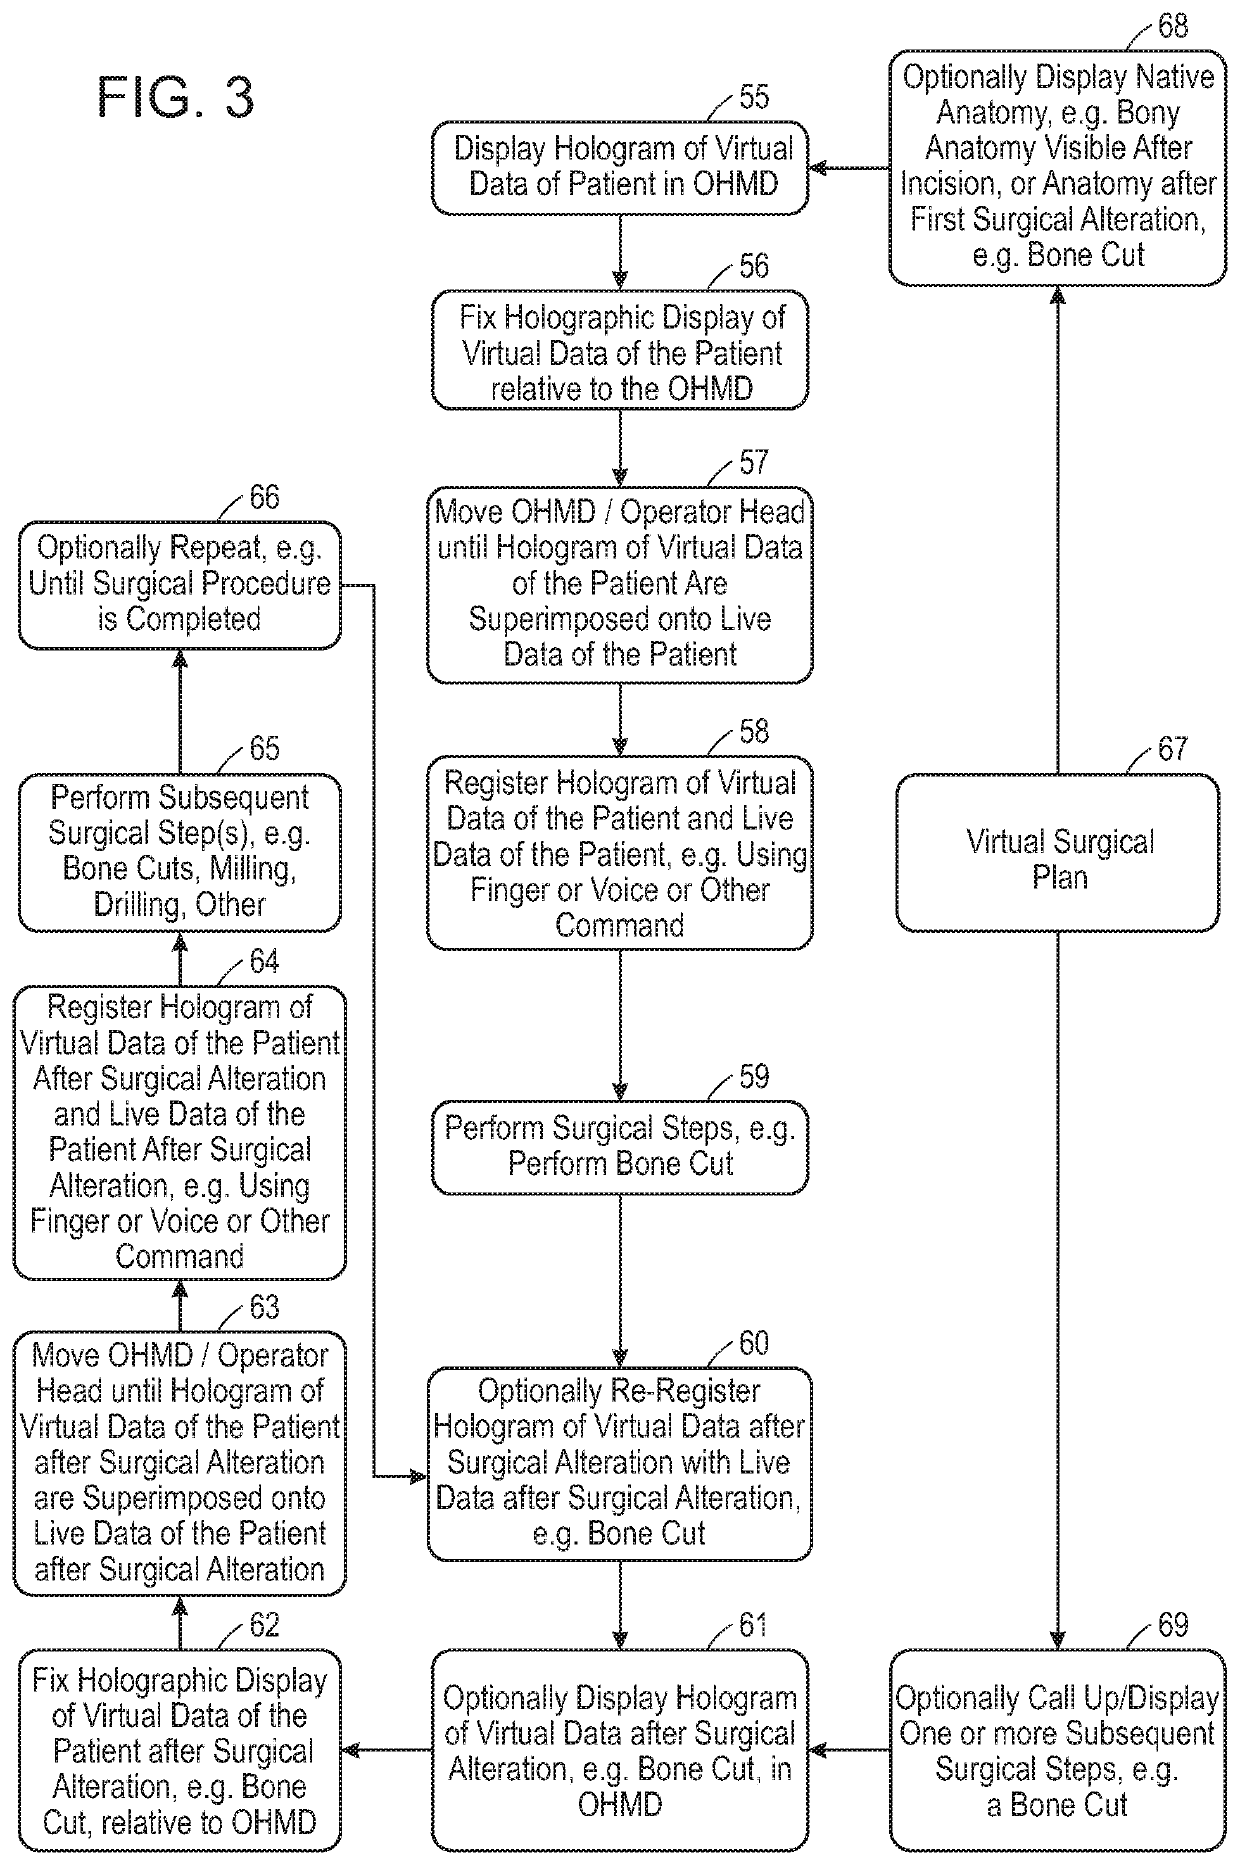 Augmented Reality System Configured for Coordinate Correction or Re-Registration Responsive to Spinal Movement for Spinal Procedures, Including Intraoperative Imaging, CT Scan or Robotics